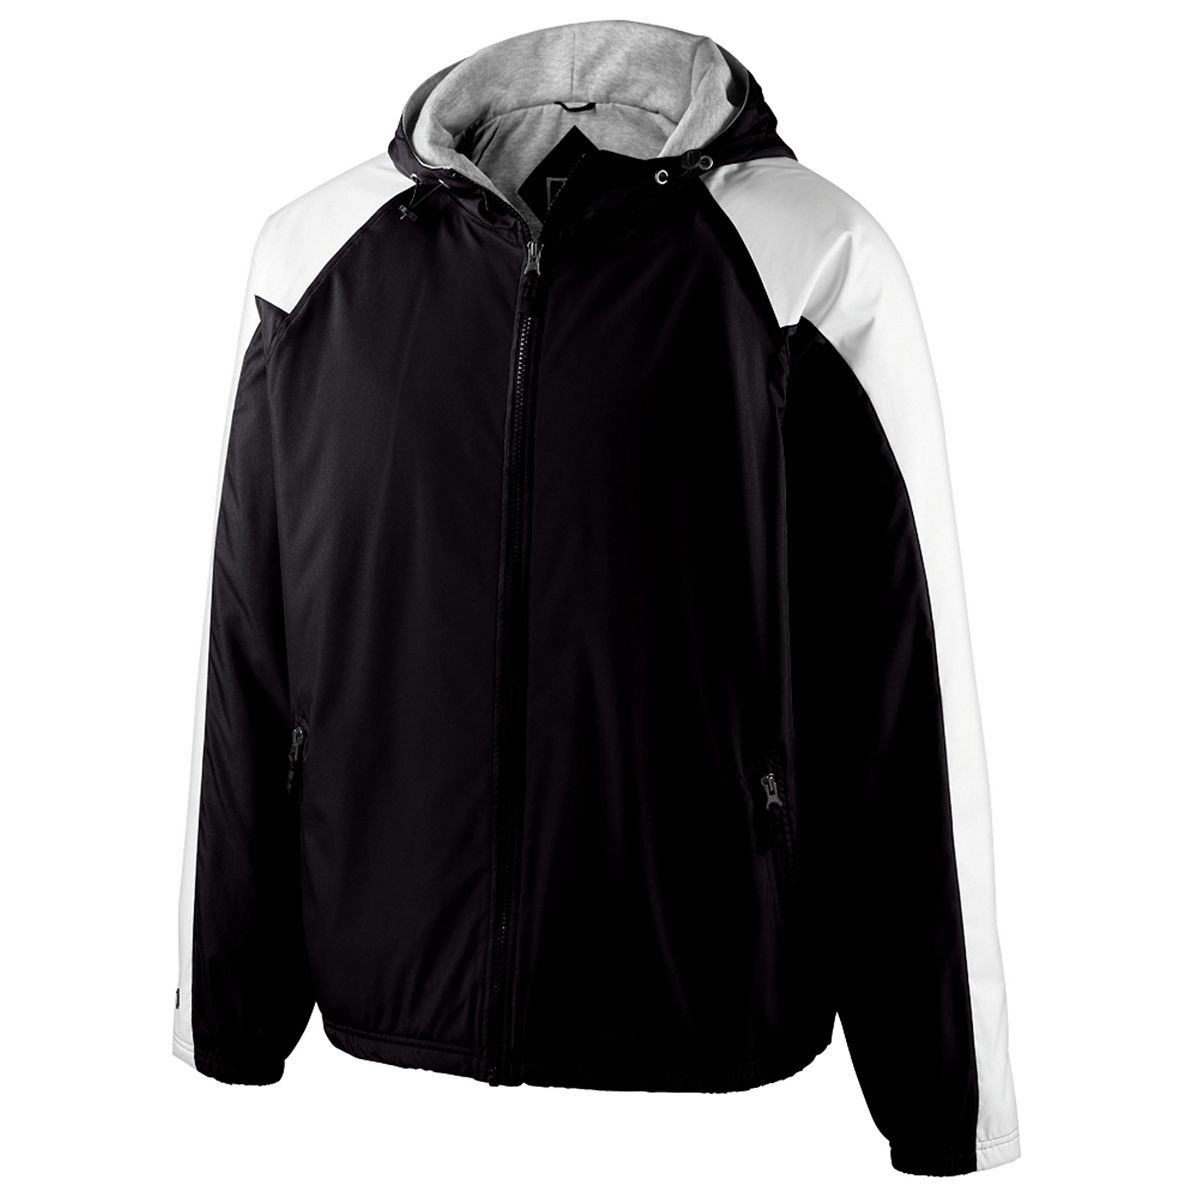 Holloway Homefield Jacket in Black/White  -Part of the Adult, Adult-Jacket, Holloway, Outerwear product lines at KanaleyCreations.com